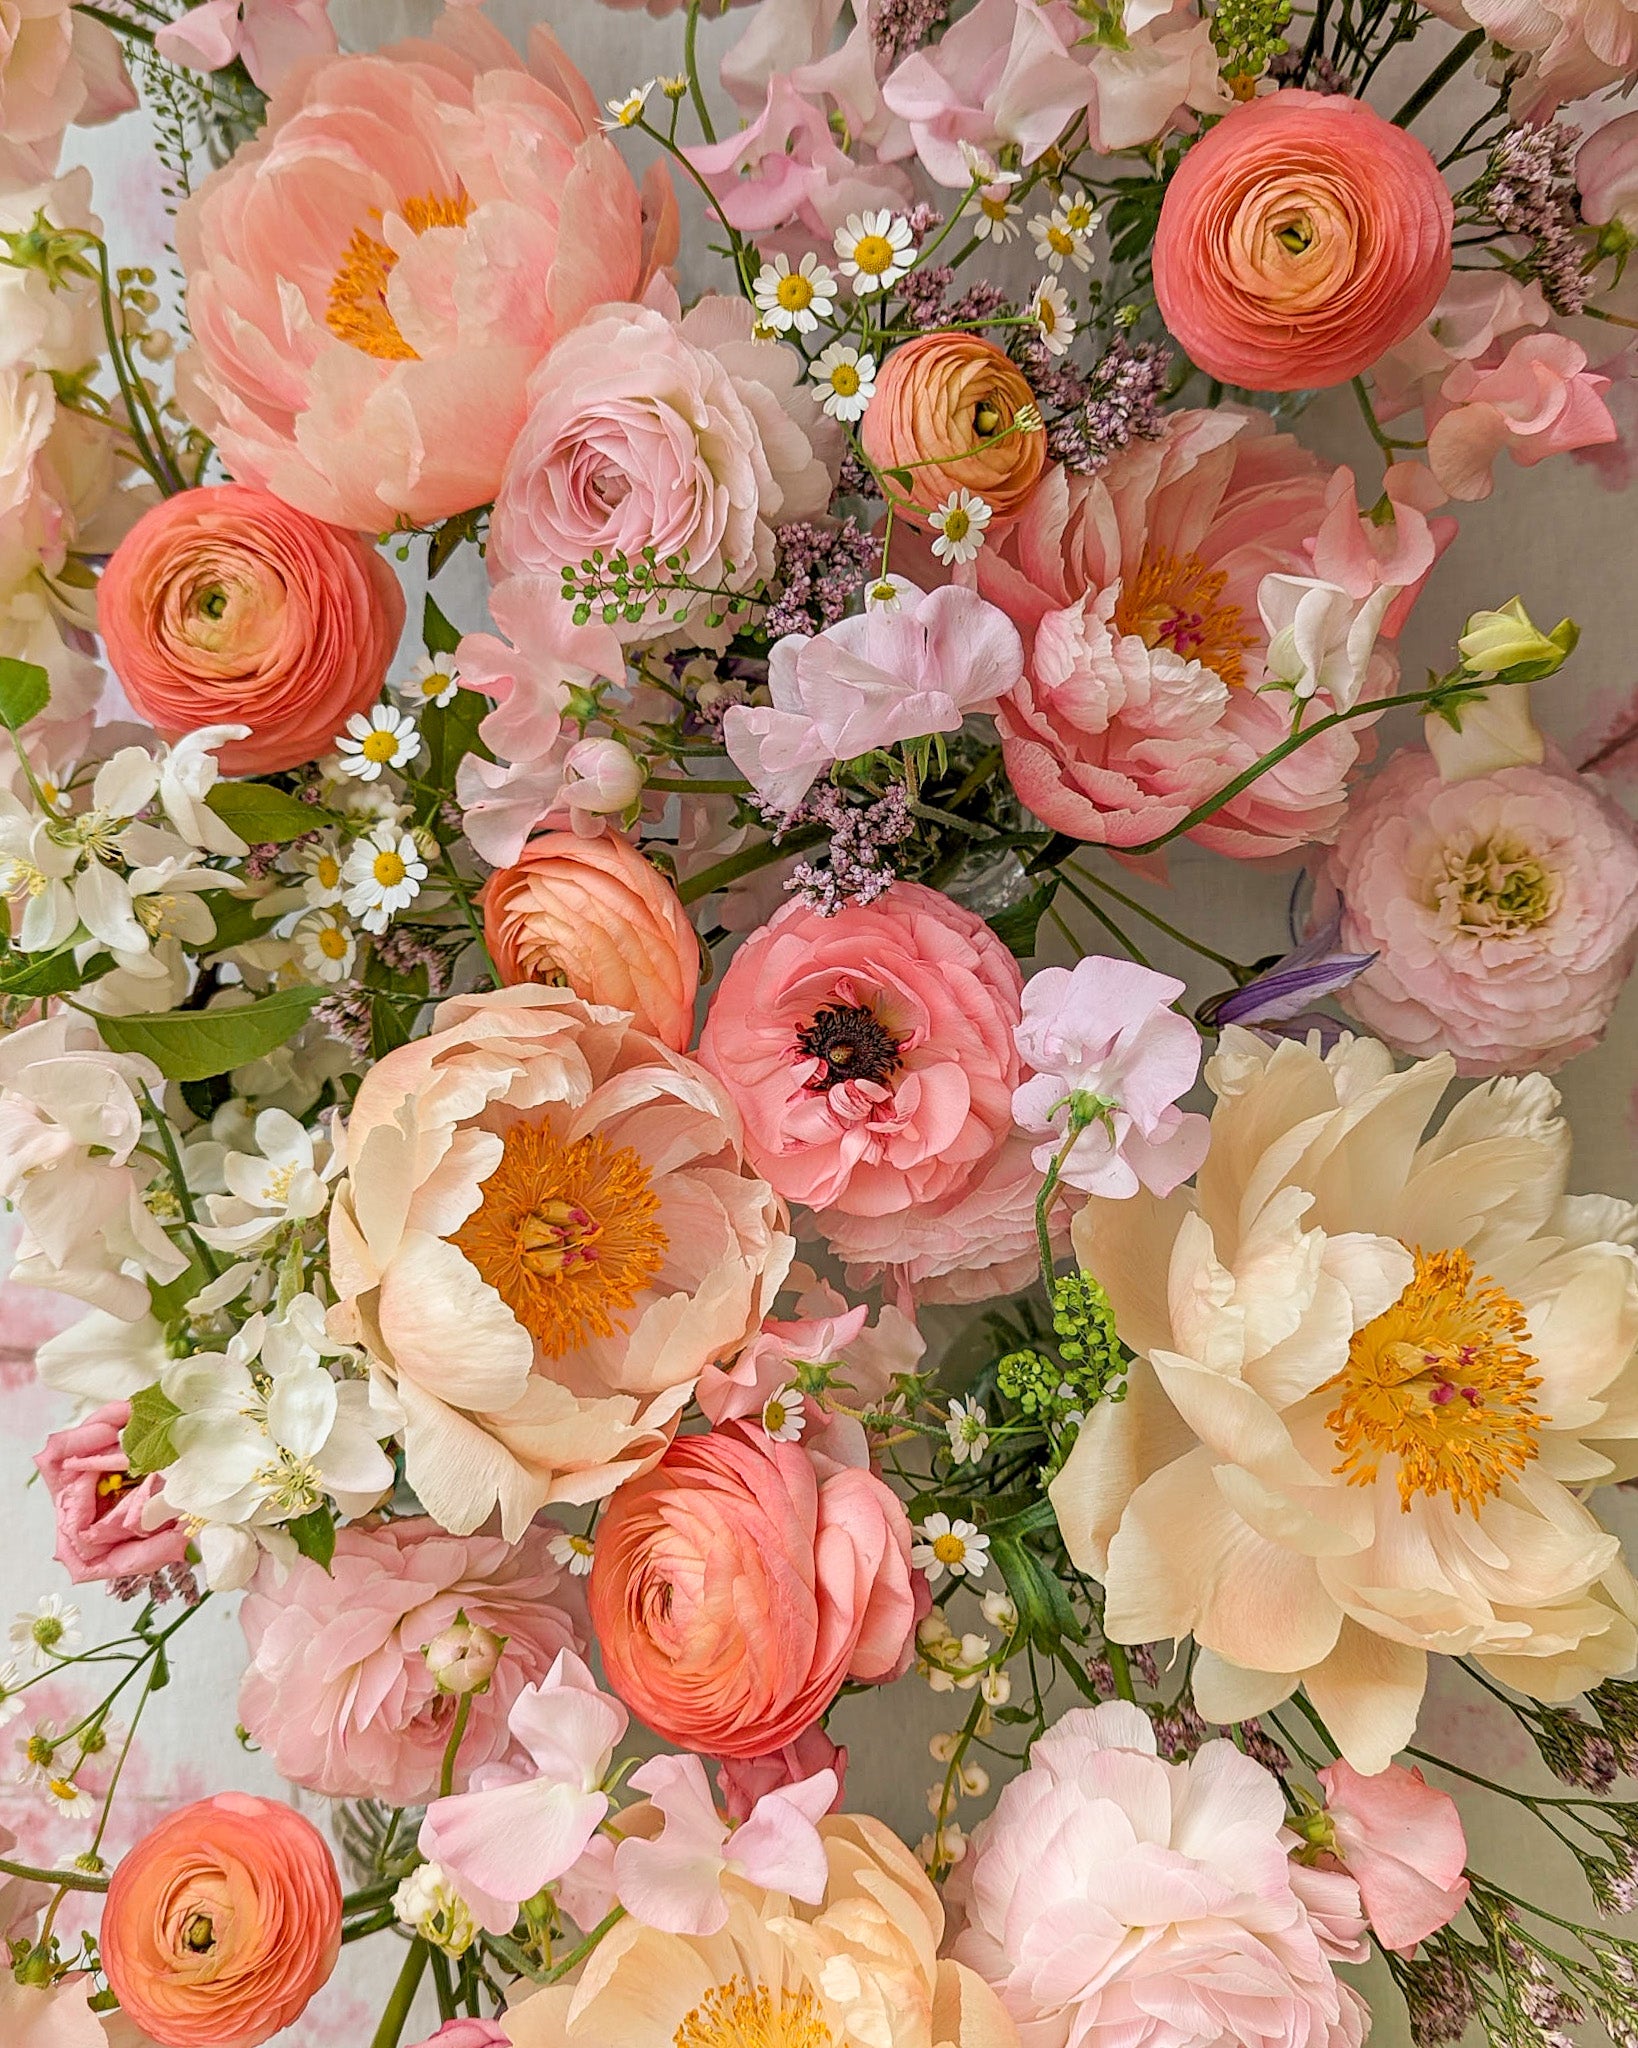 Peonies and spring flowers